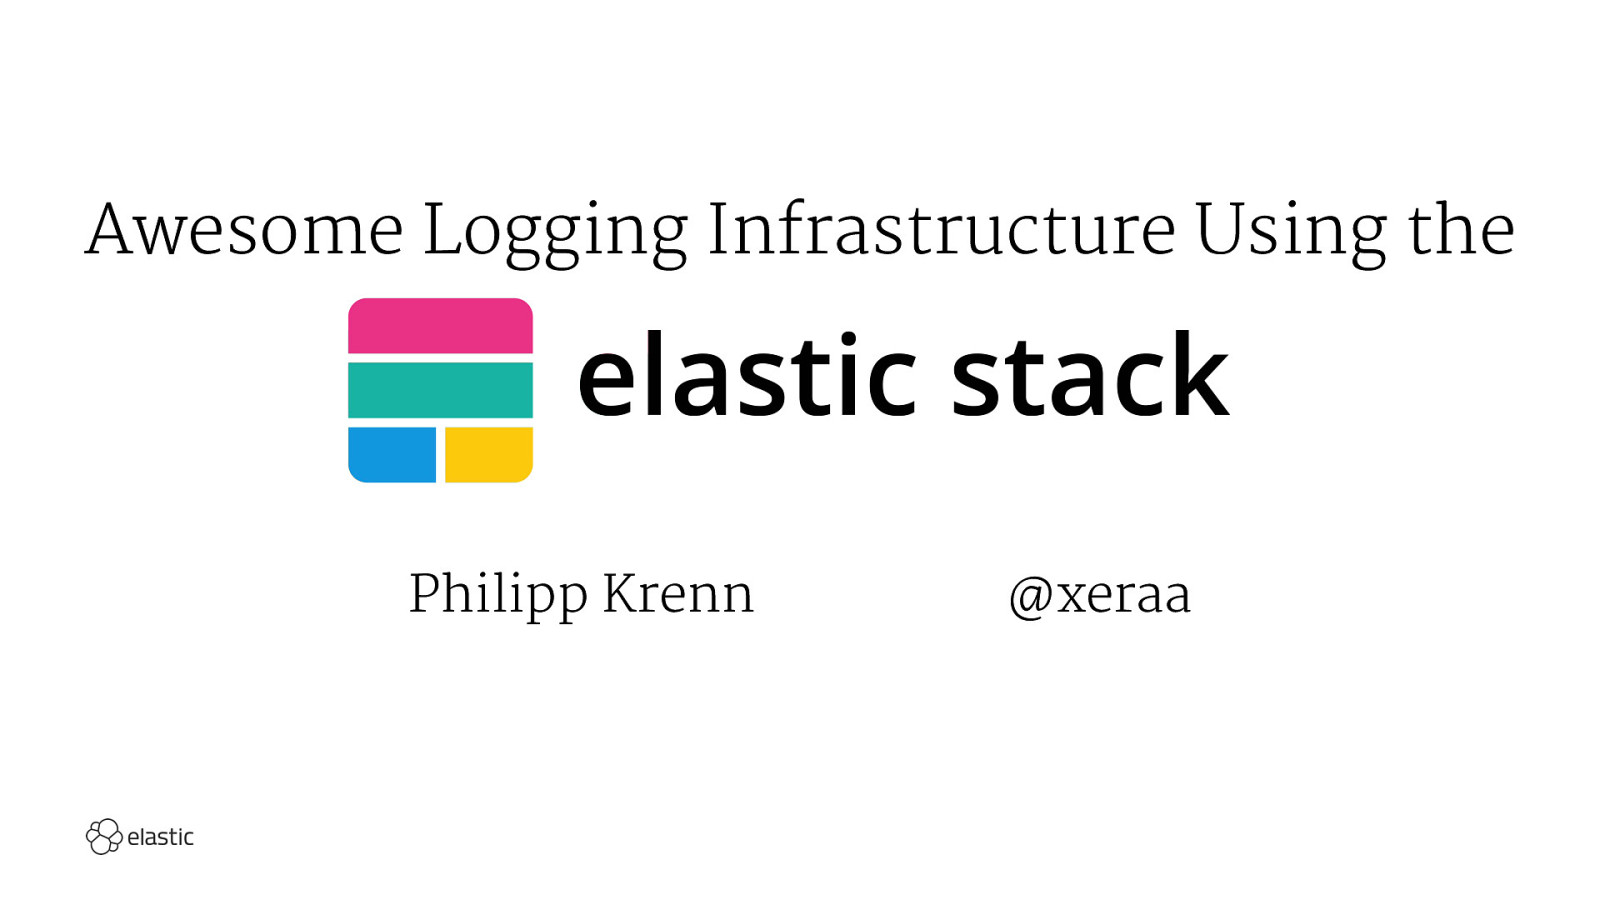 Awesome Monitoring Infrastructure Using the Elastic Stack